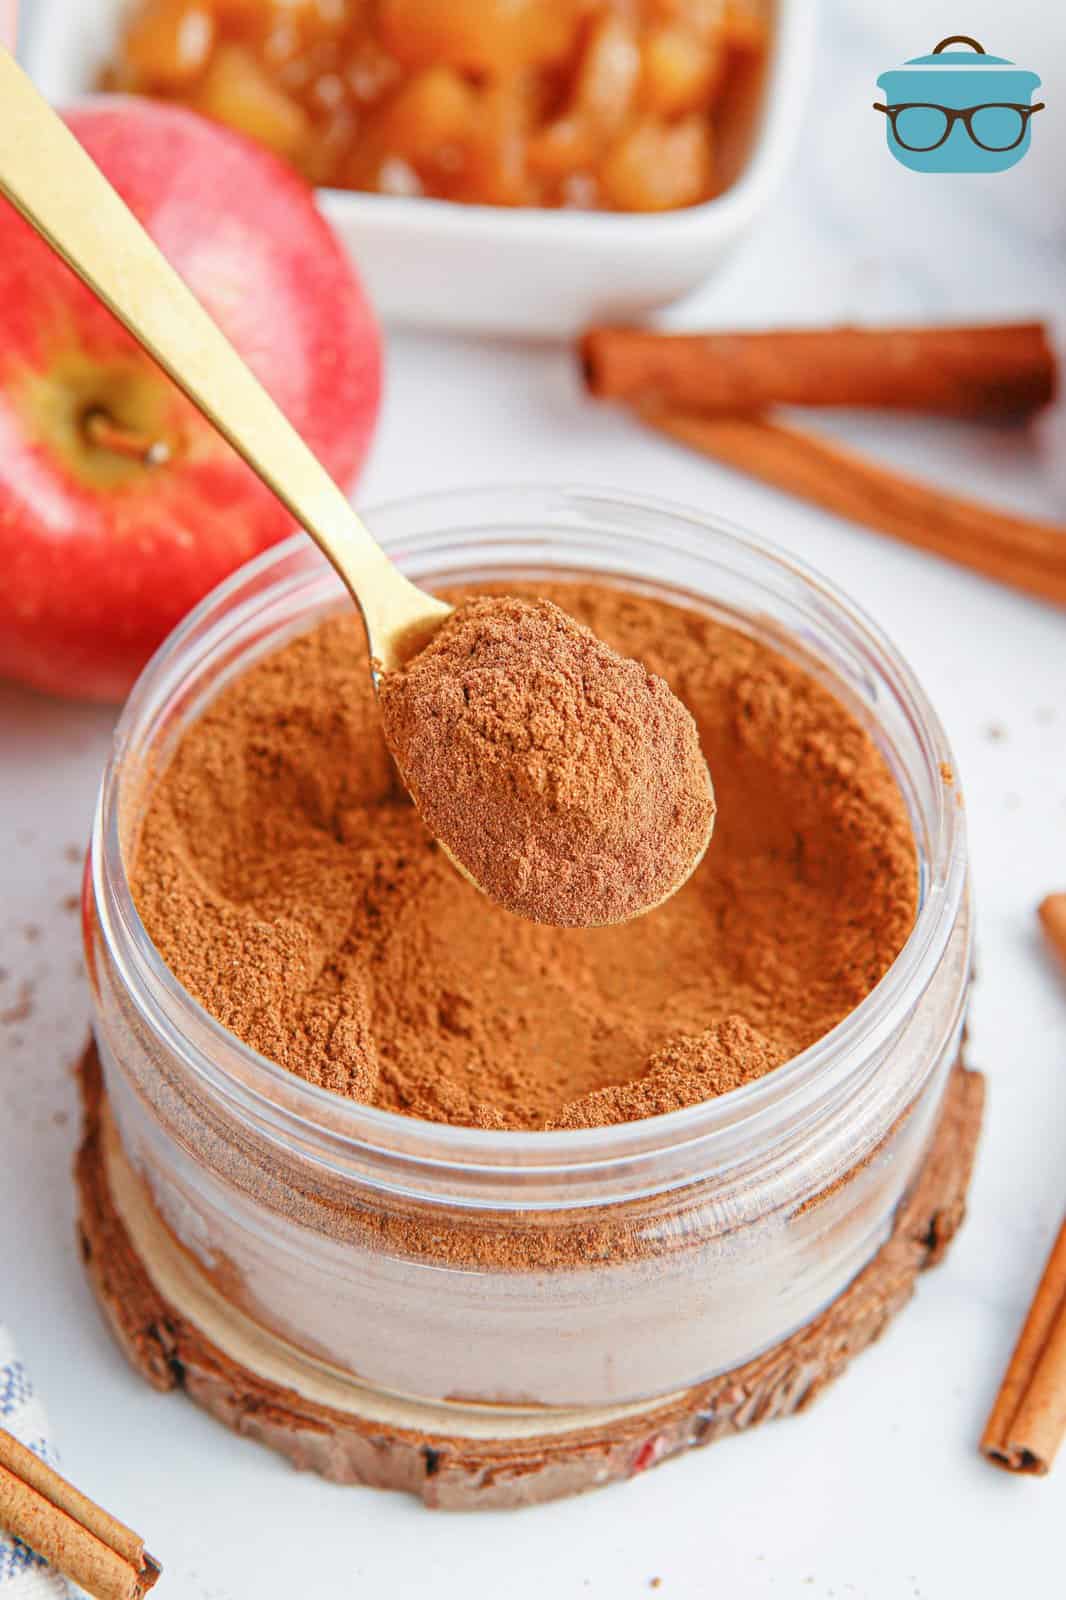 A spoon holding some Apple Pie Spice over the jar.